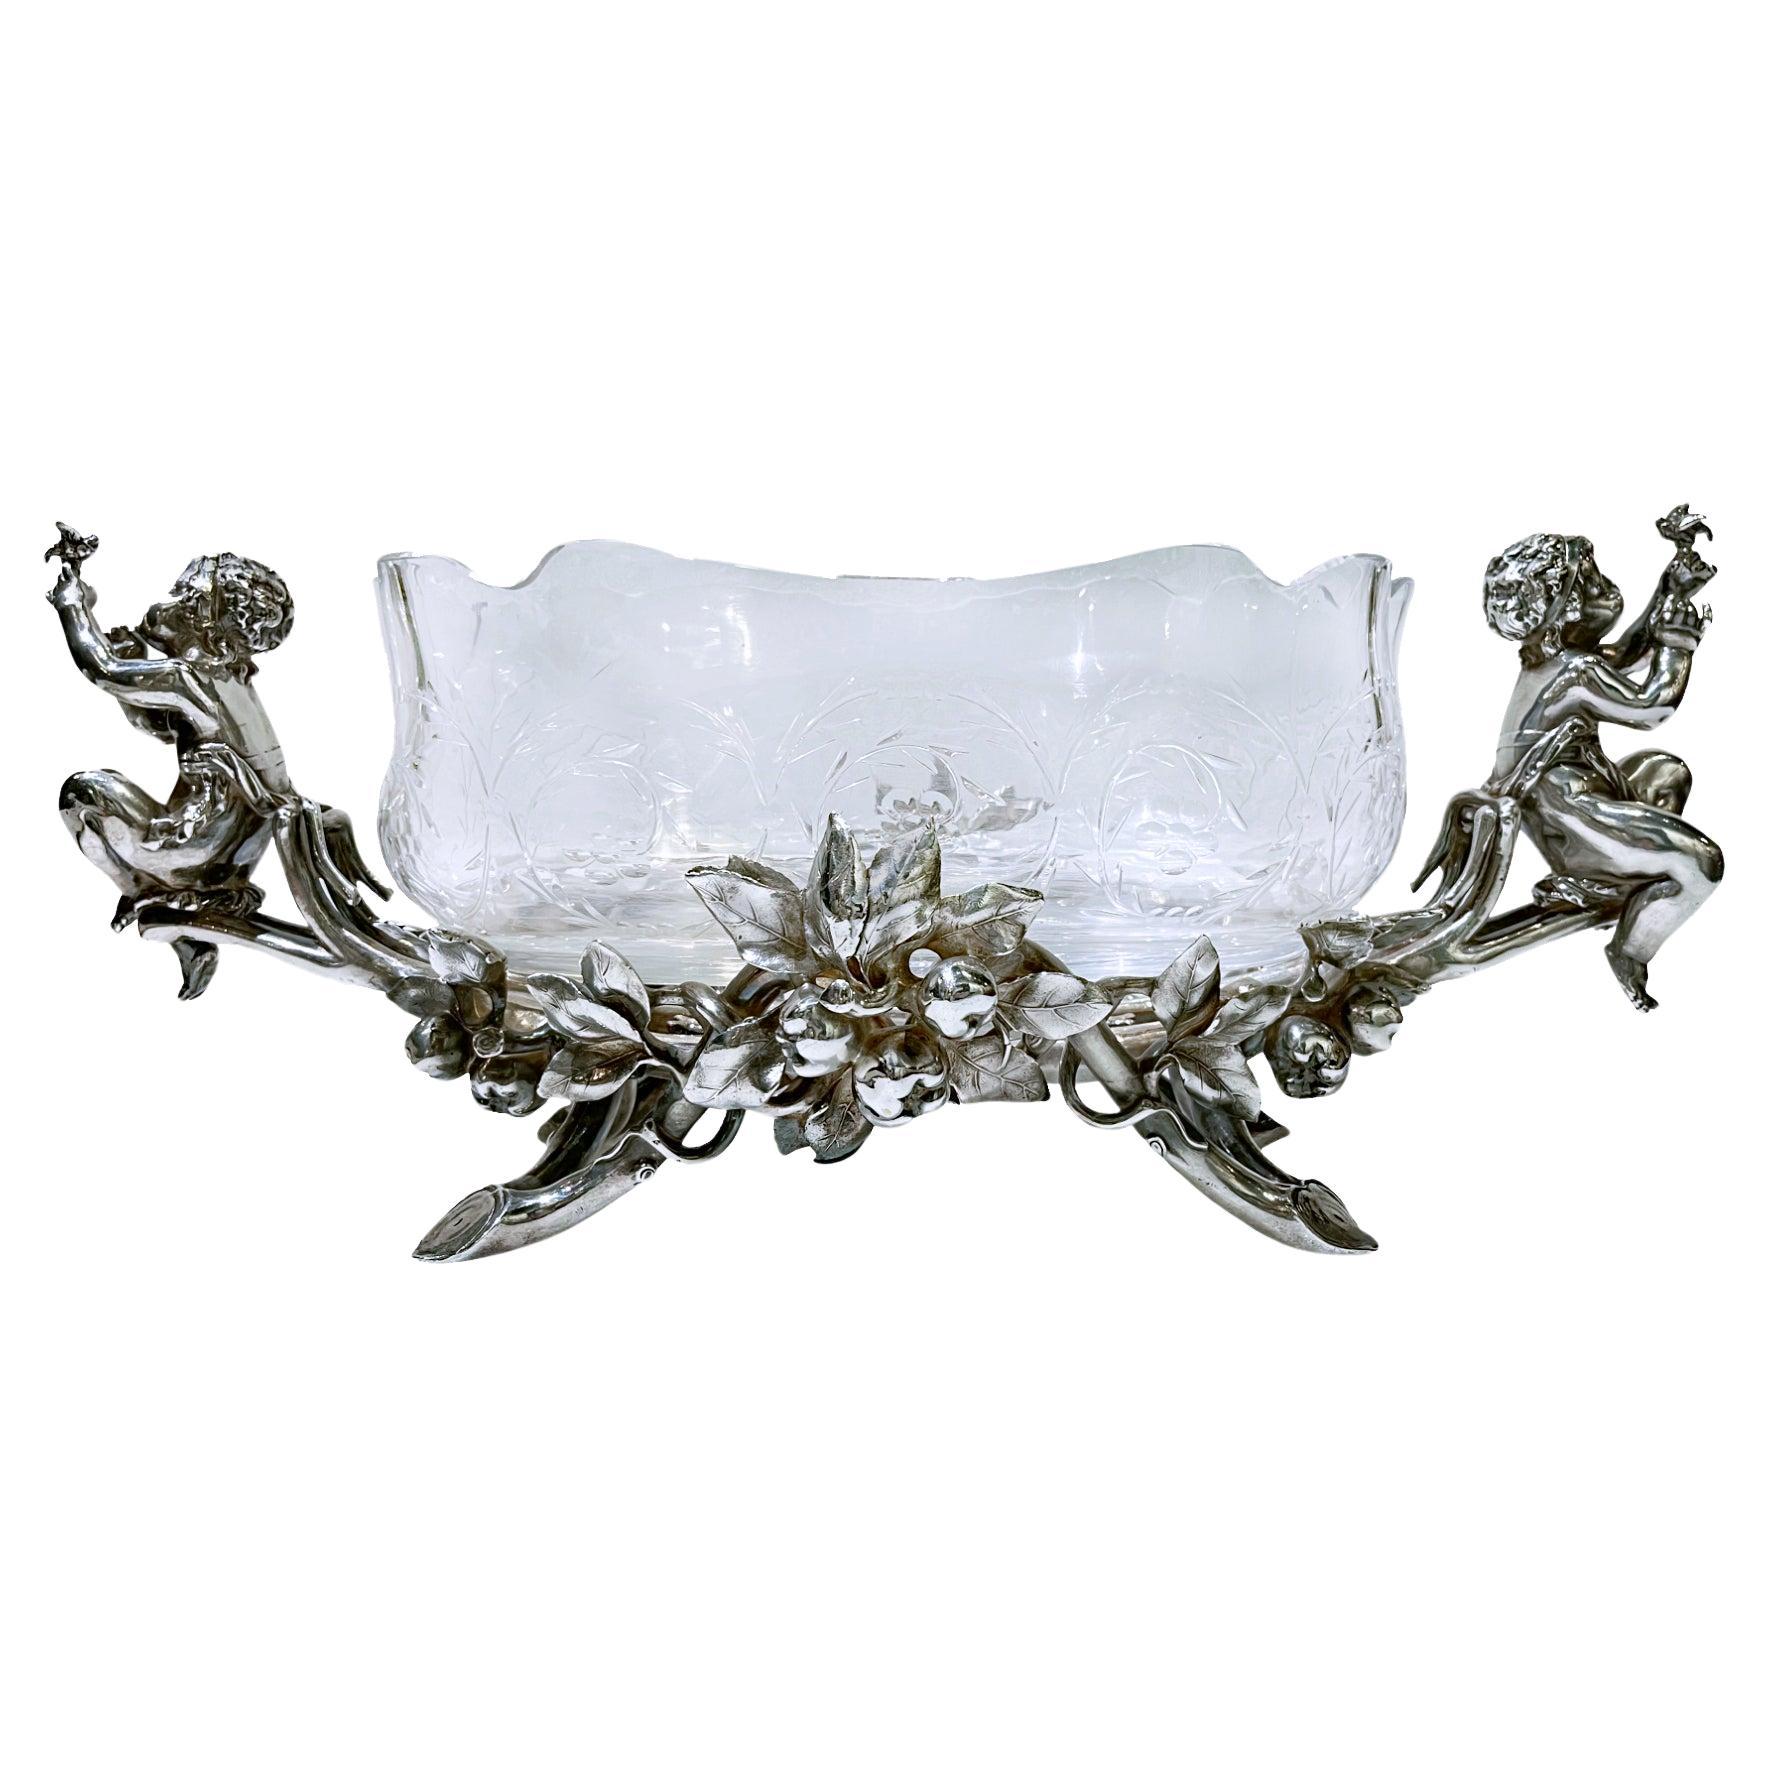 Celestial Christofle Crystal Centerpiece Bowl On Fitted Silver Stand